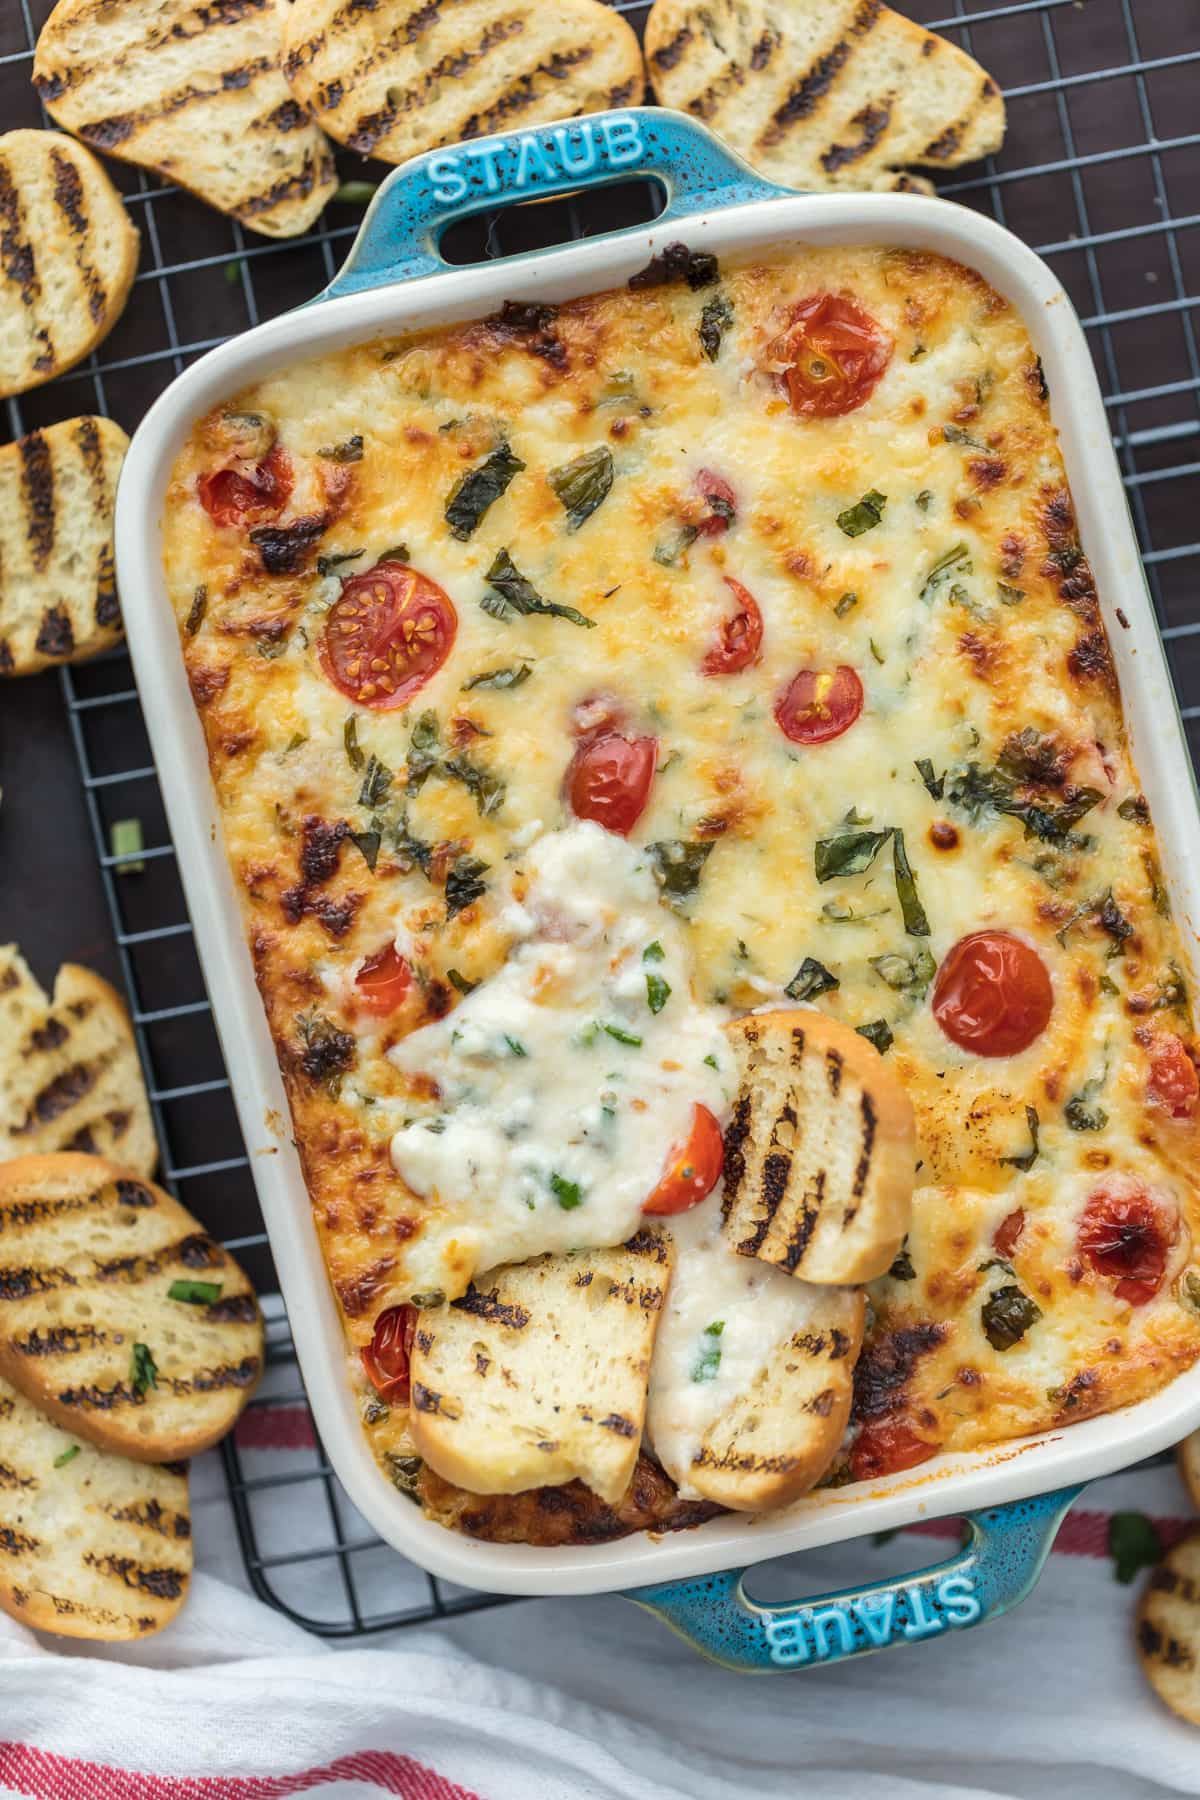 Super Bowl Party Dip Recipes
 Cheesy Caprese Dip The Cookie Rookie